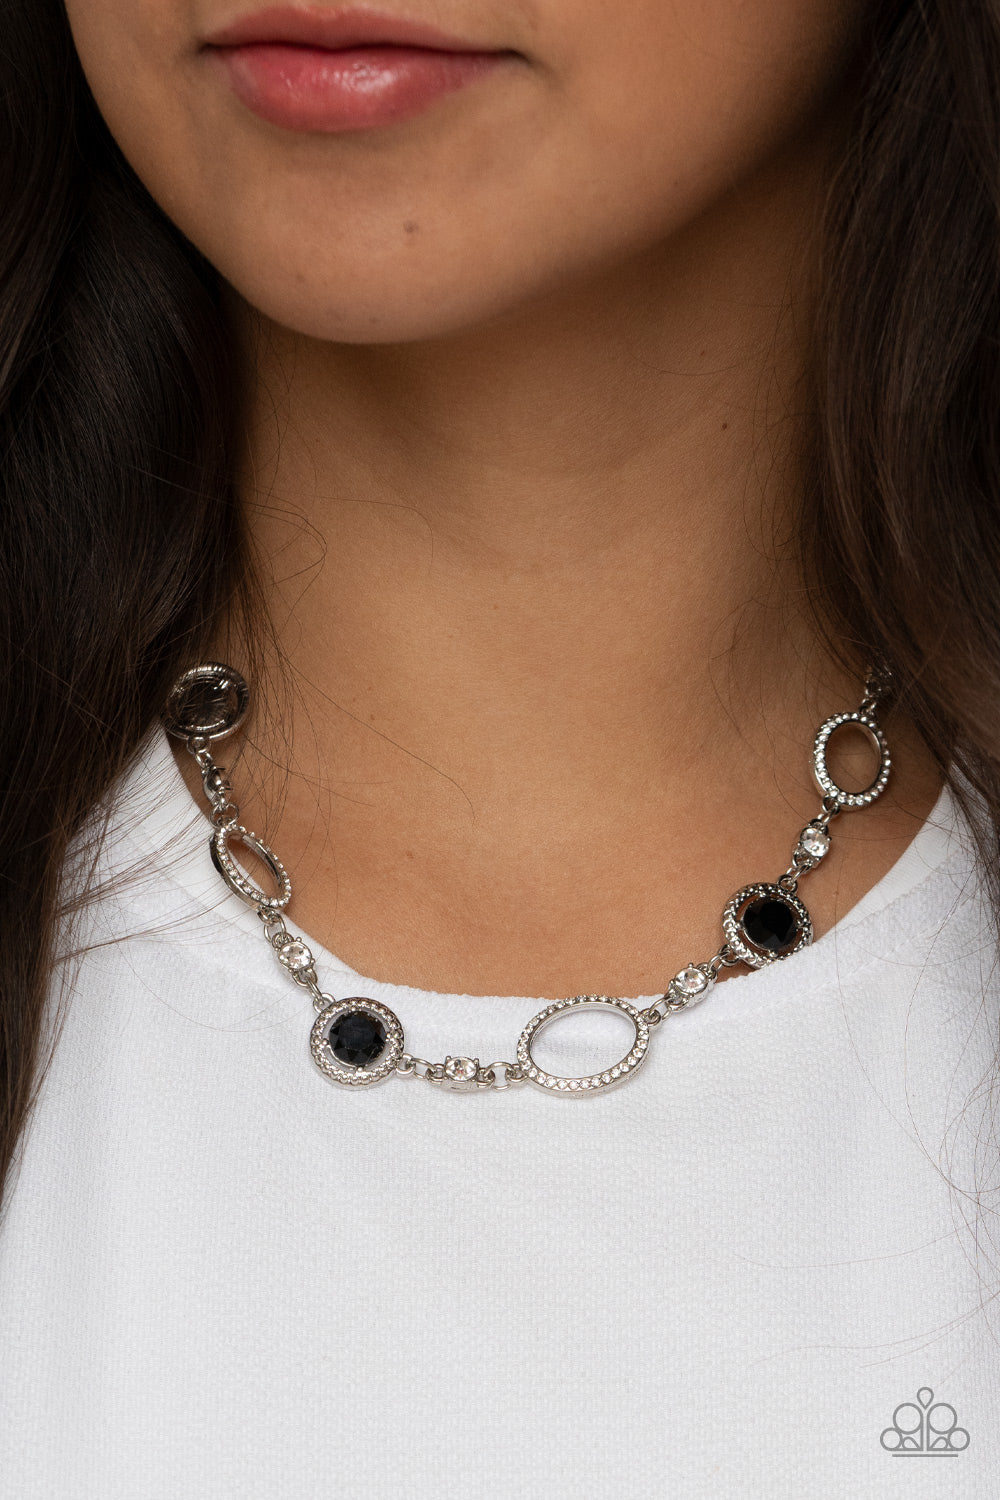 Pushing Your LUXE Black Necklace